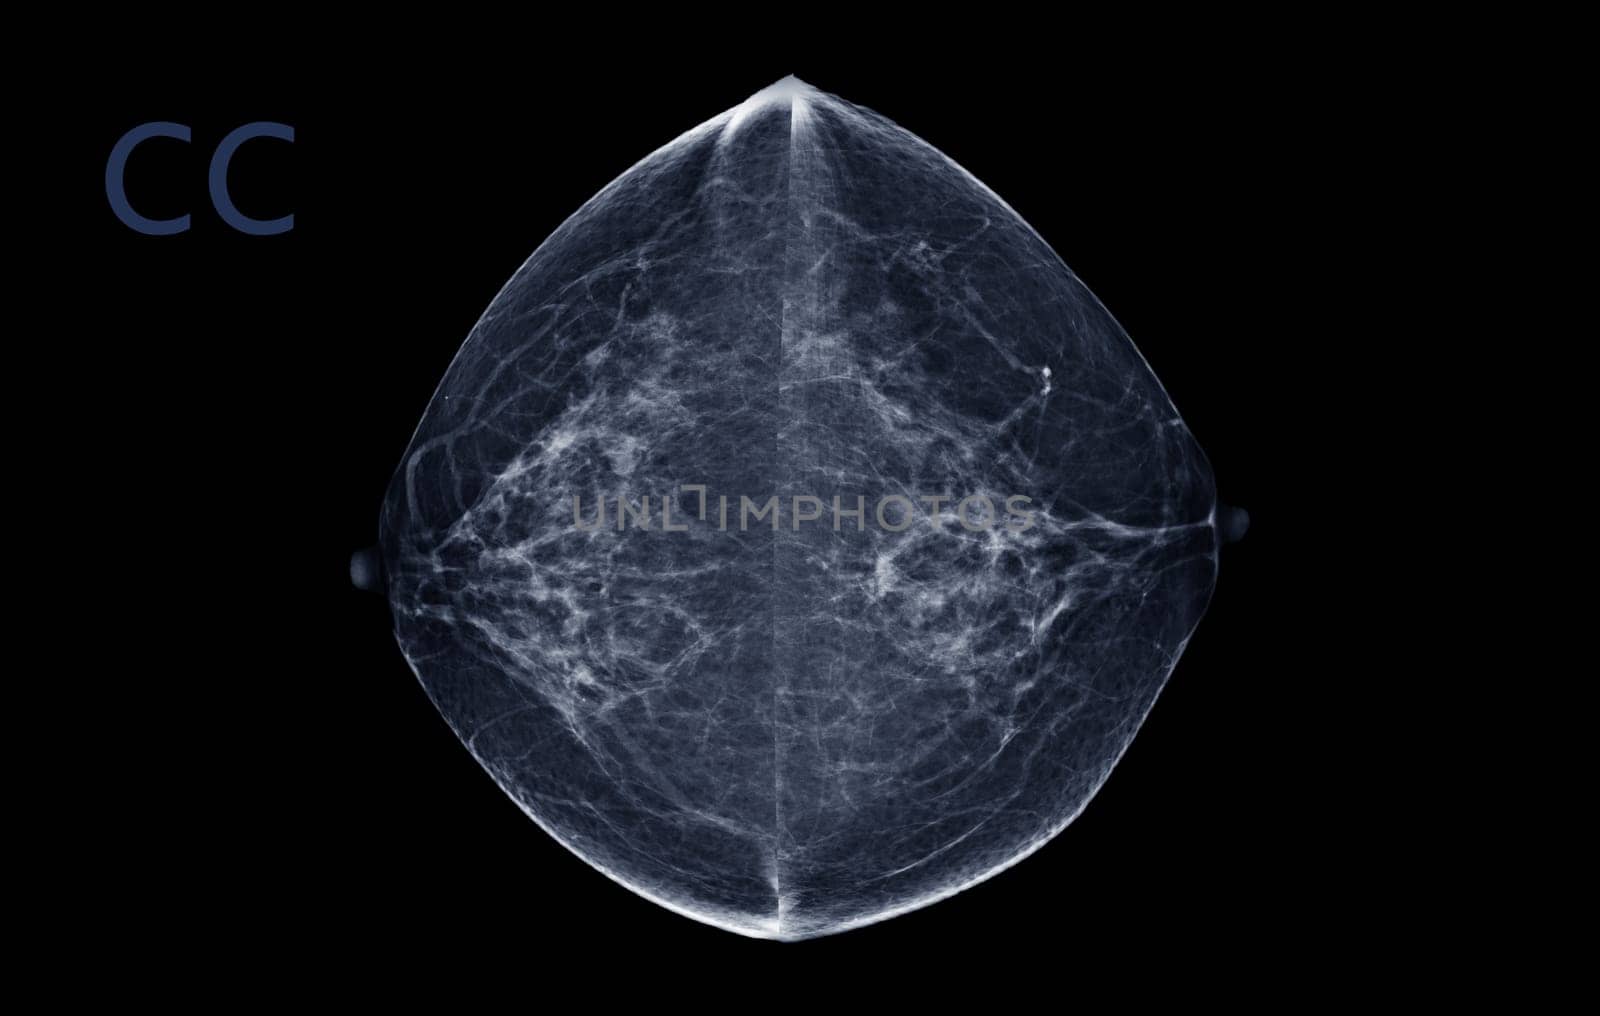  X-ray Digital Mammogram of Both  side  CC view . mammography or breast scan for Breast cancer  showing BI-RADS CATEGORY 2  Benign tumor.